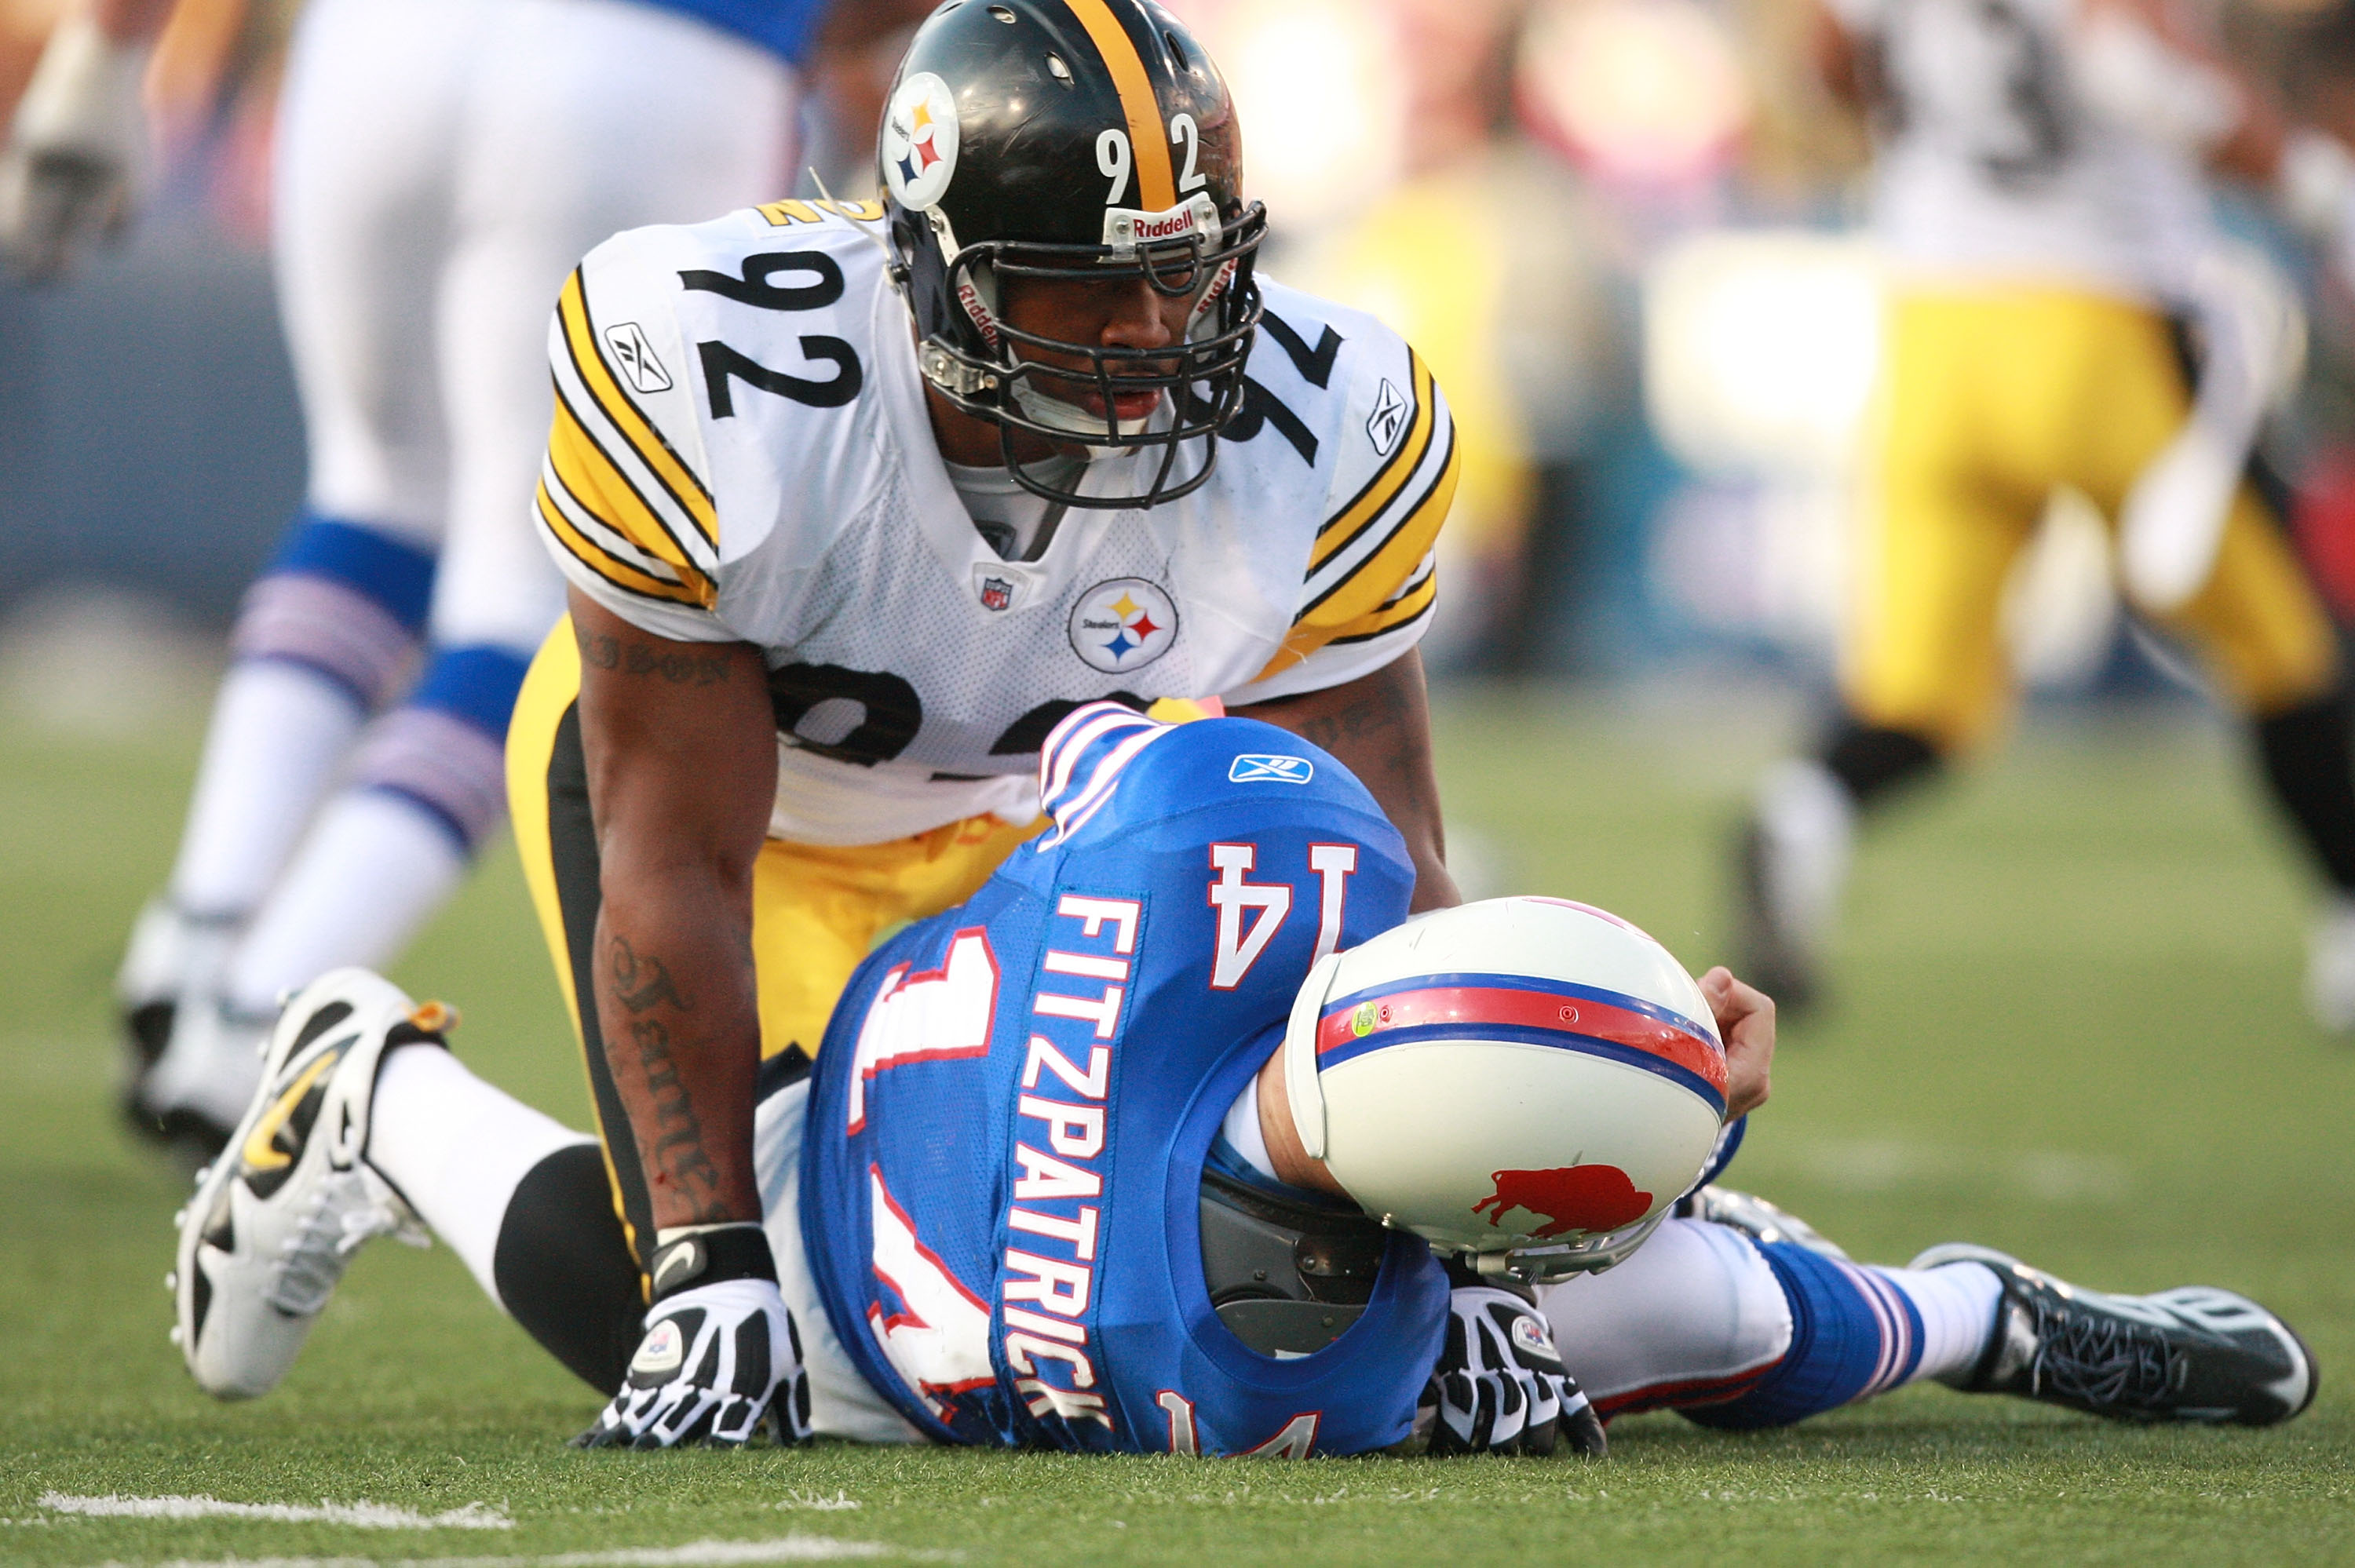 ORCHARD PARK, NY - NOVEMBER 28:  James Harrison #92 of the Pittsburgh Steelers rises after hitting Ryan Fitzpatrick of the Buffalo Bills during their game at Ralph Wilson Stadium on November 28, 2010 in Orchard Park, New York.  Harrison was flagged for ro